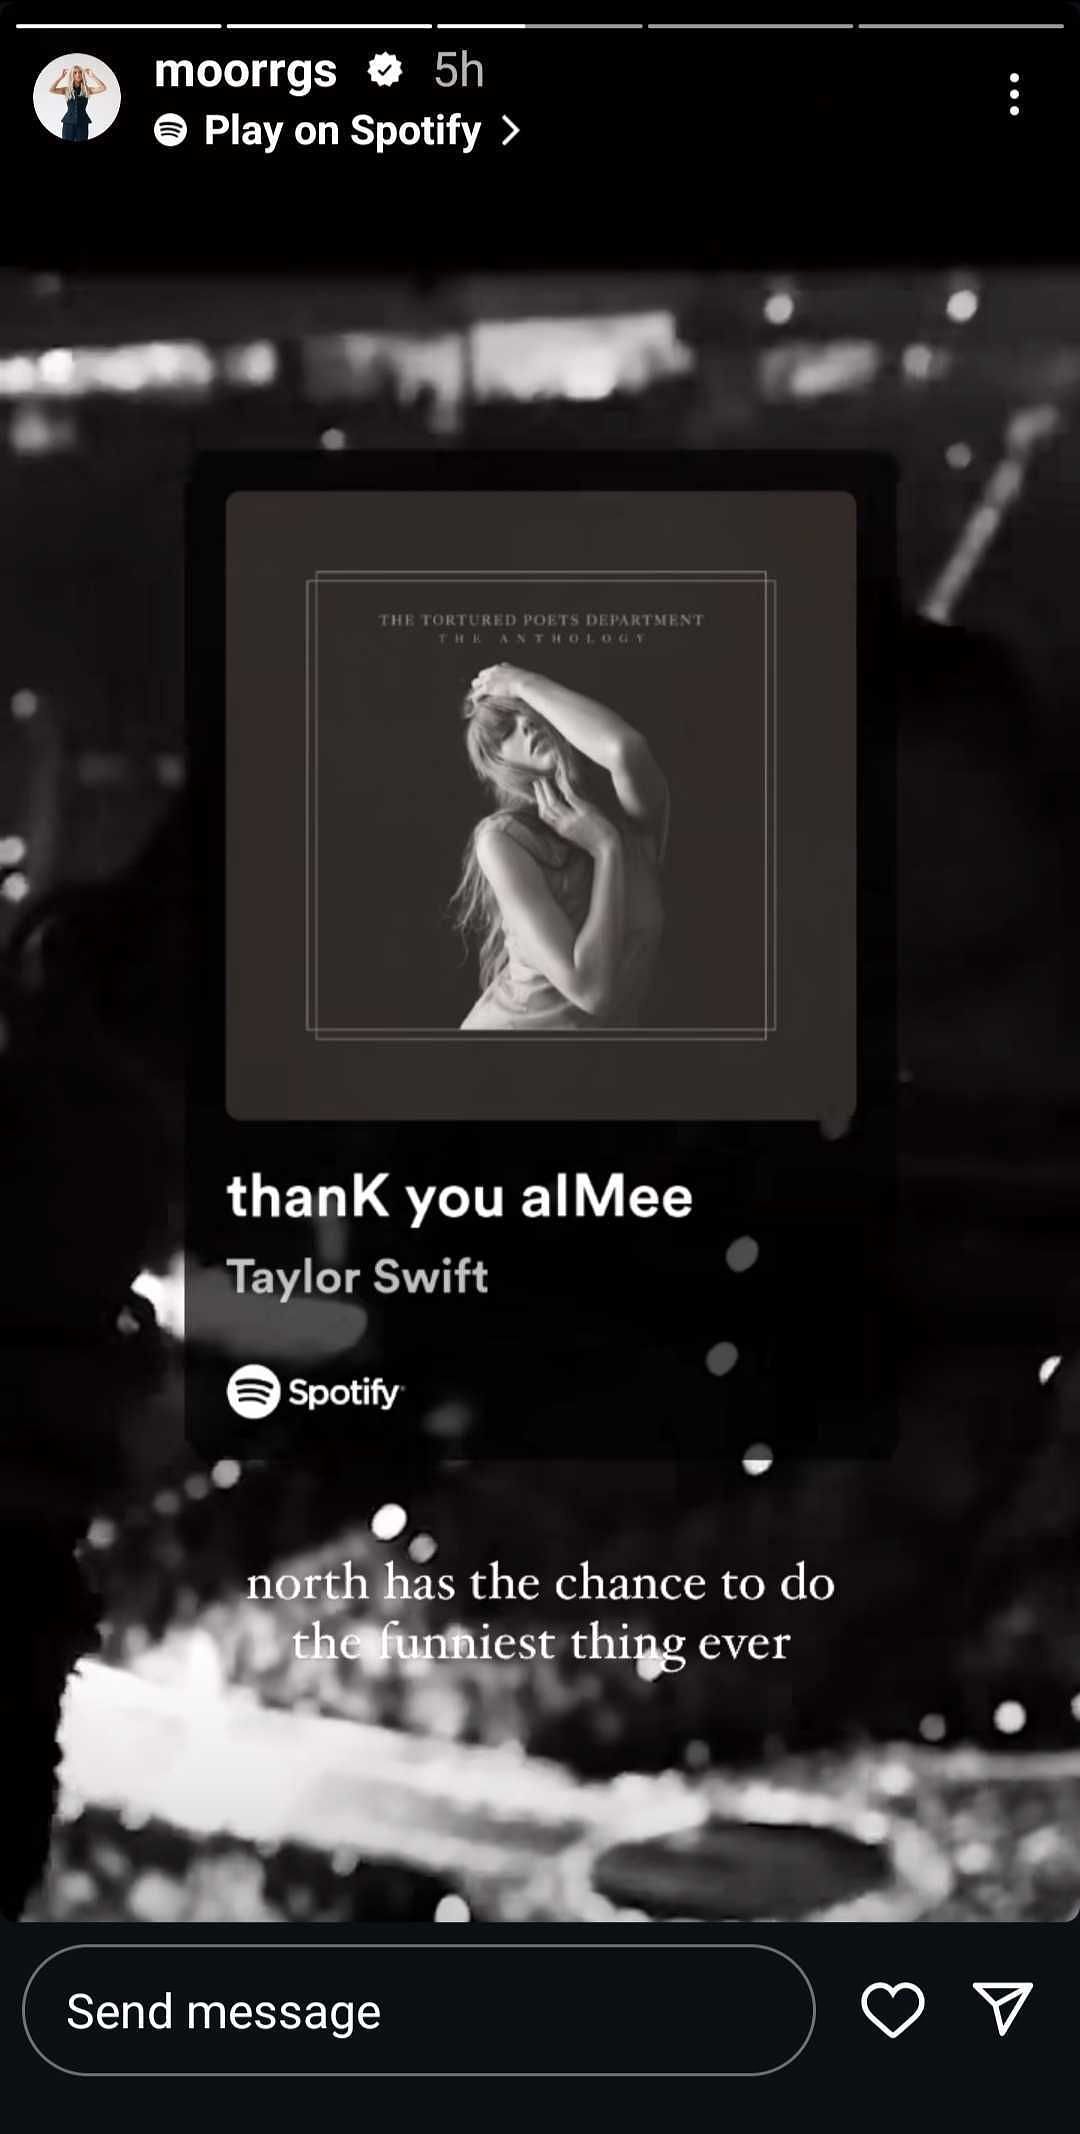 Riddle&#039;s Instagram post featuring her reaction to the song &#039;ThanK aIMee&#039; from Swift&#039;s latest album